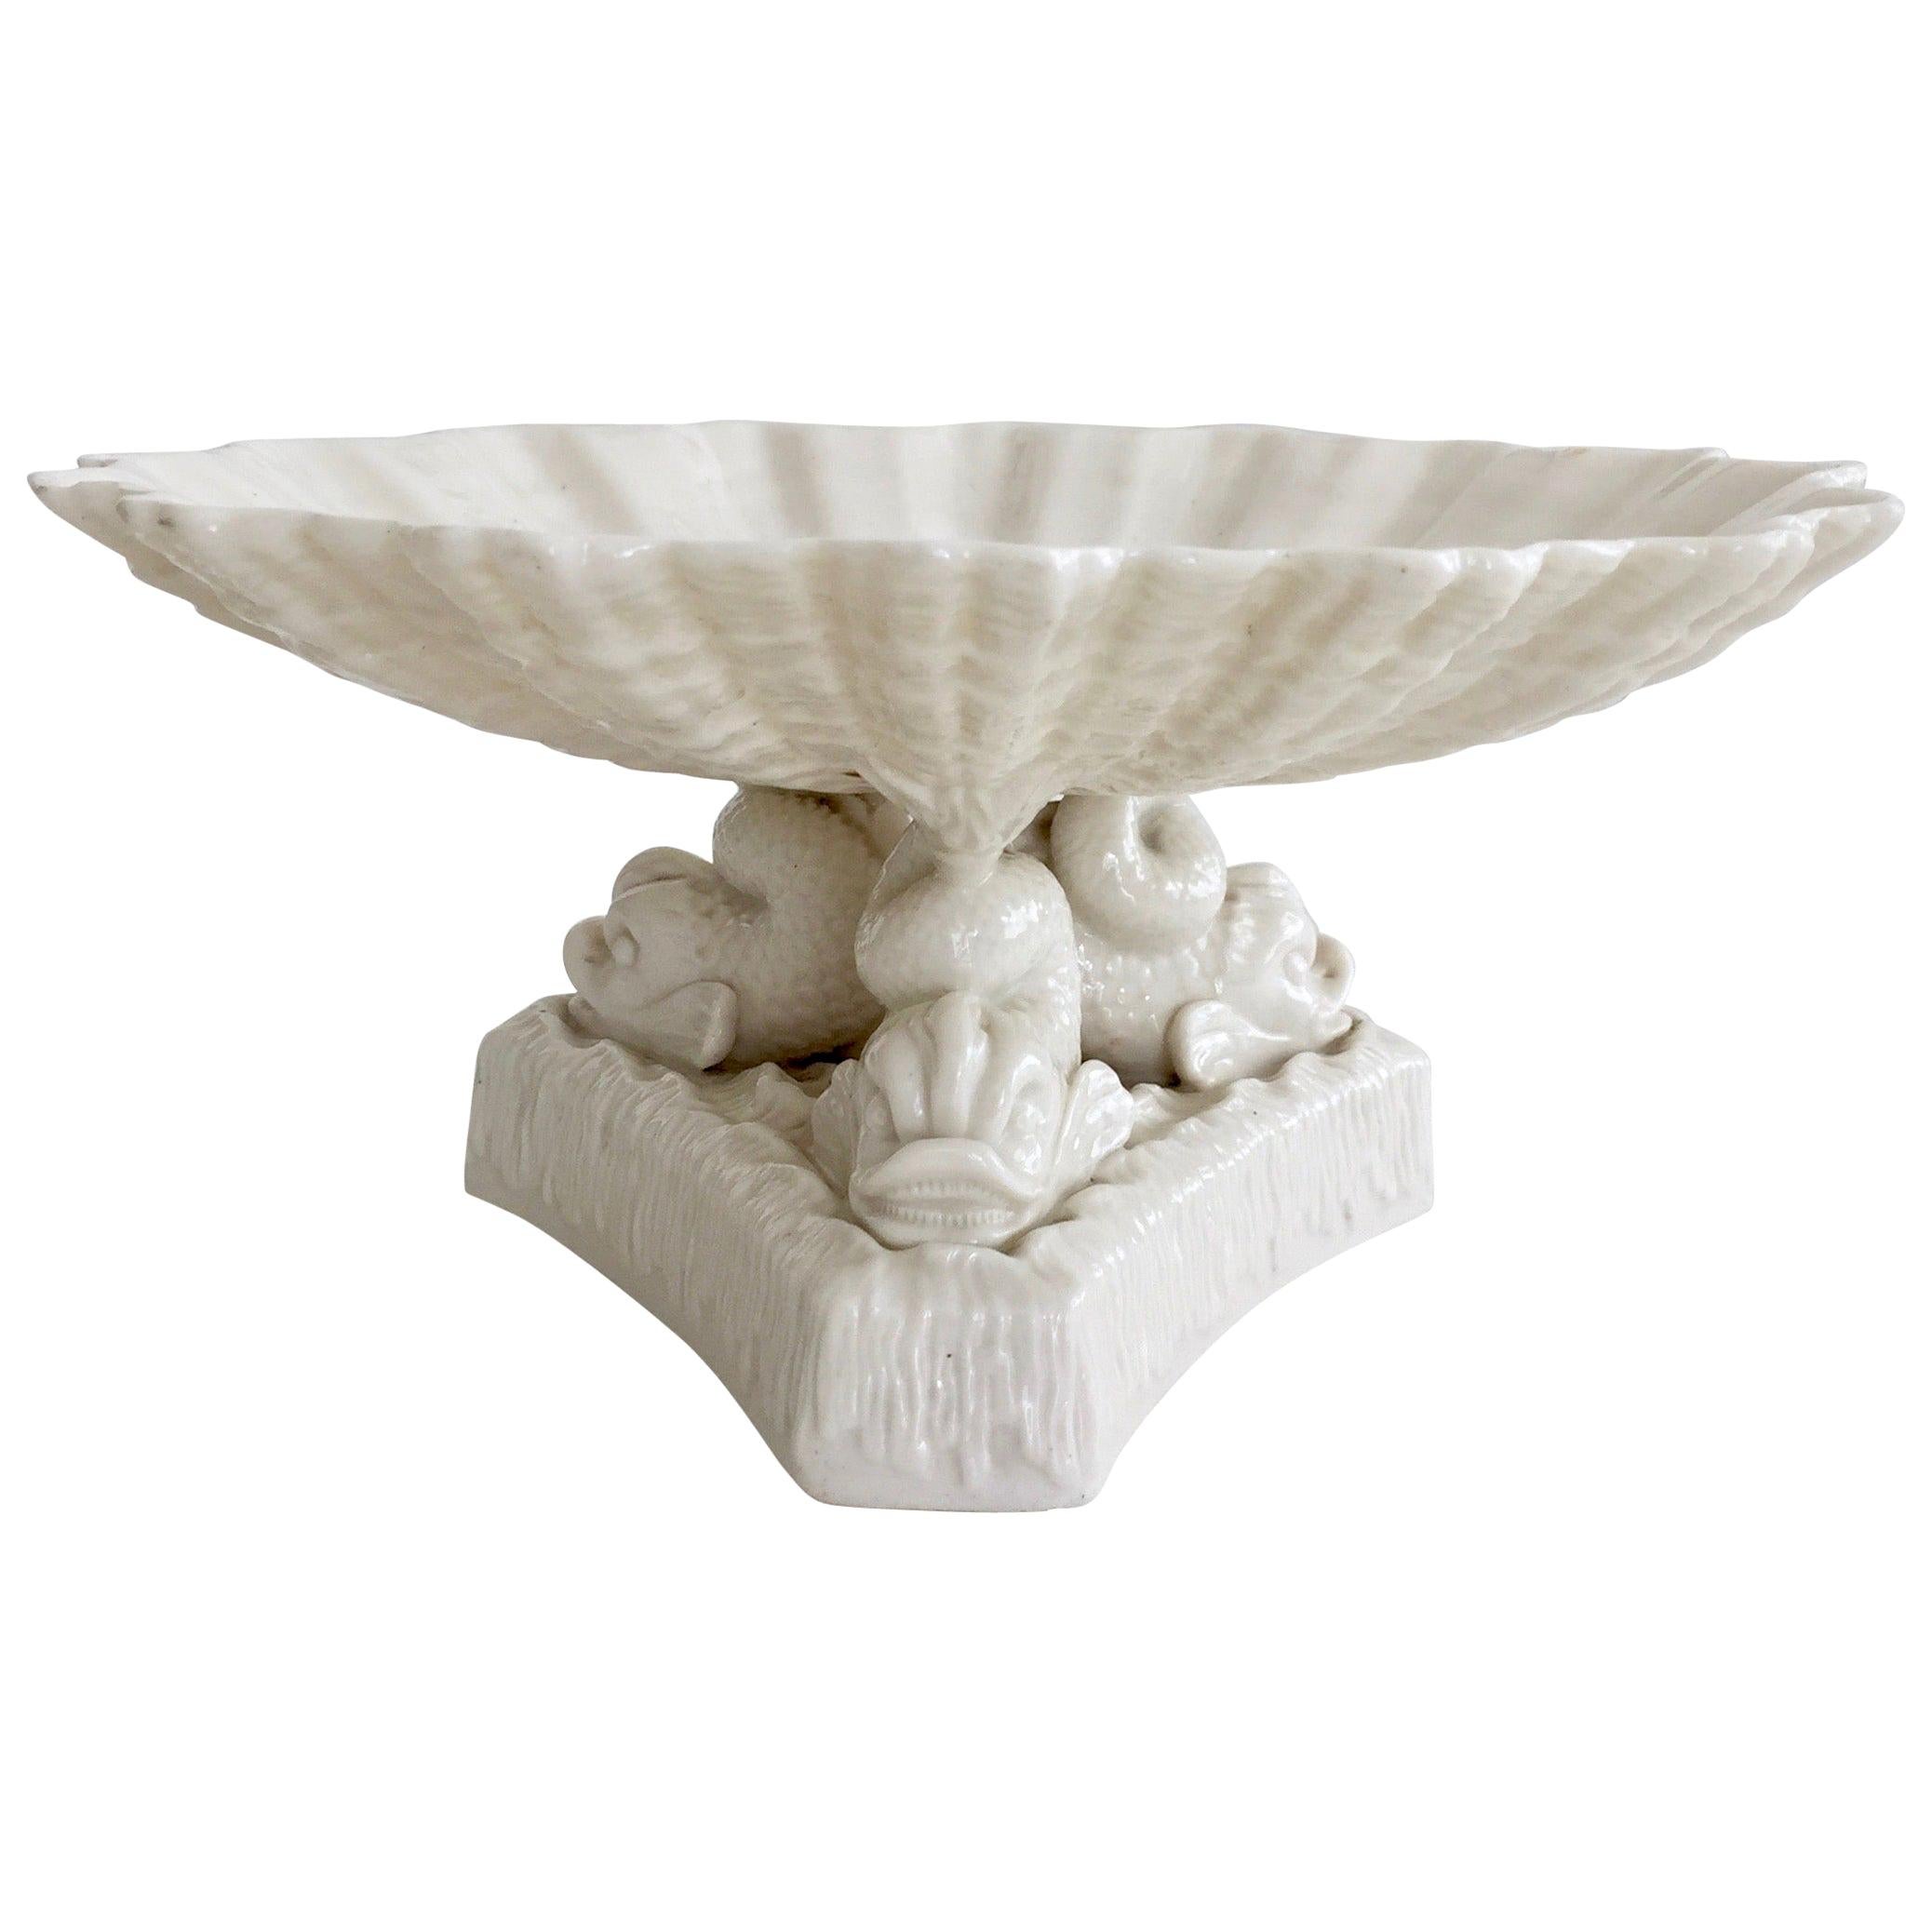 Belleek Comport, White Parian Porcelain on Dolphin Foot, Victorian, 1863-1891